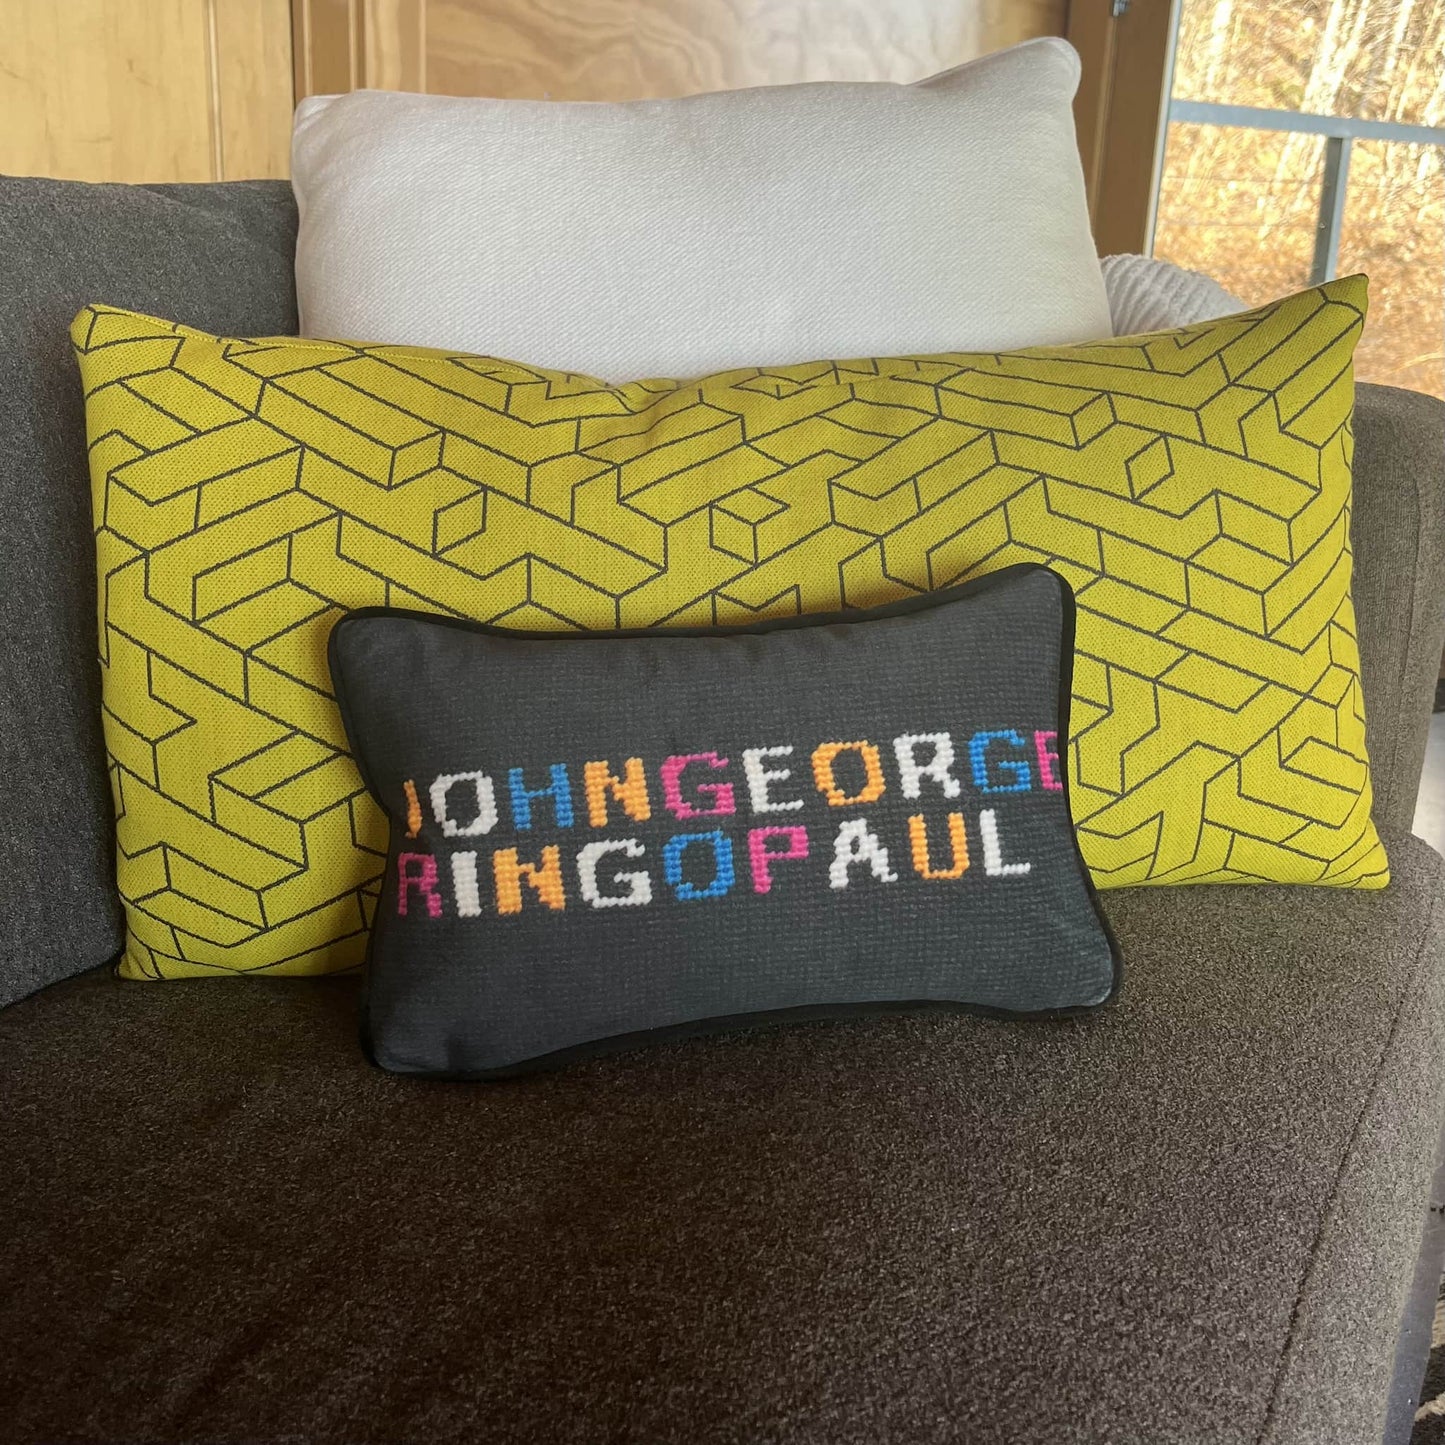 JOHNGEORGE on top line; RINGOPAUL written in colorful yellow, white, blue and pink letters on solid black background. The Beatles pillow.